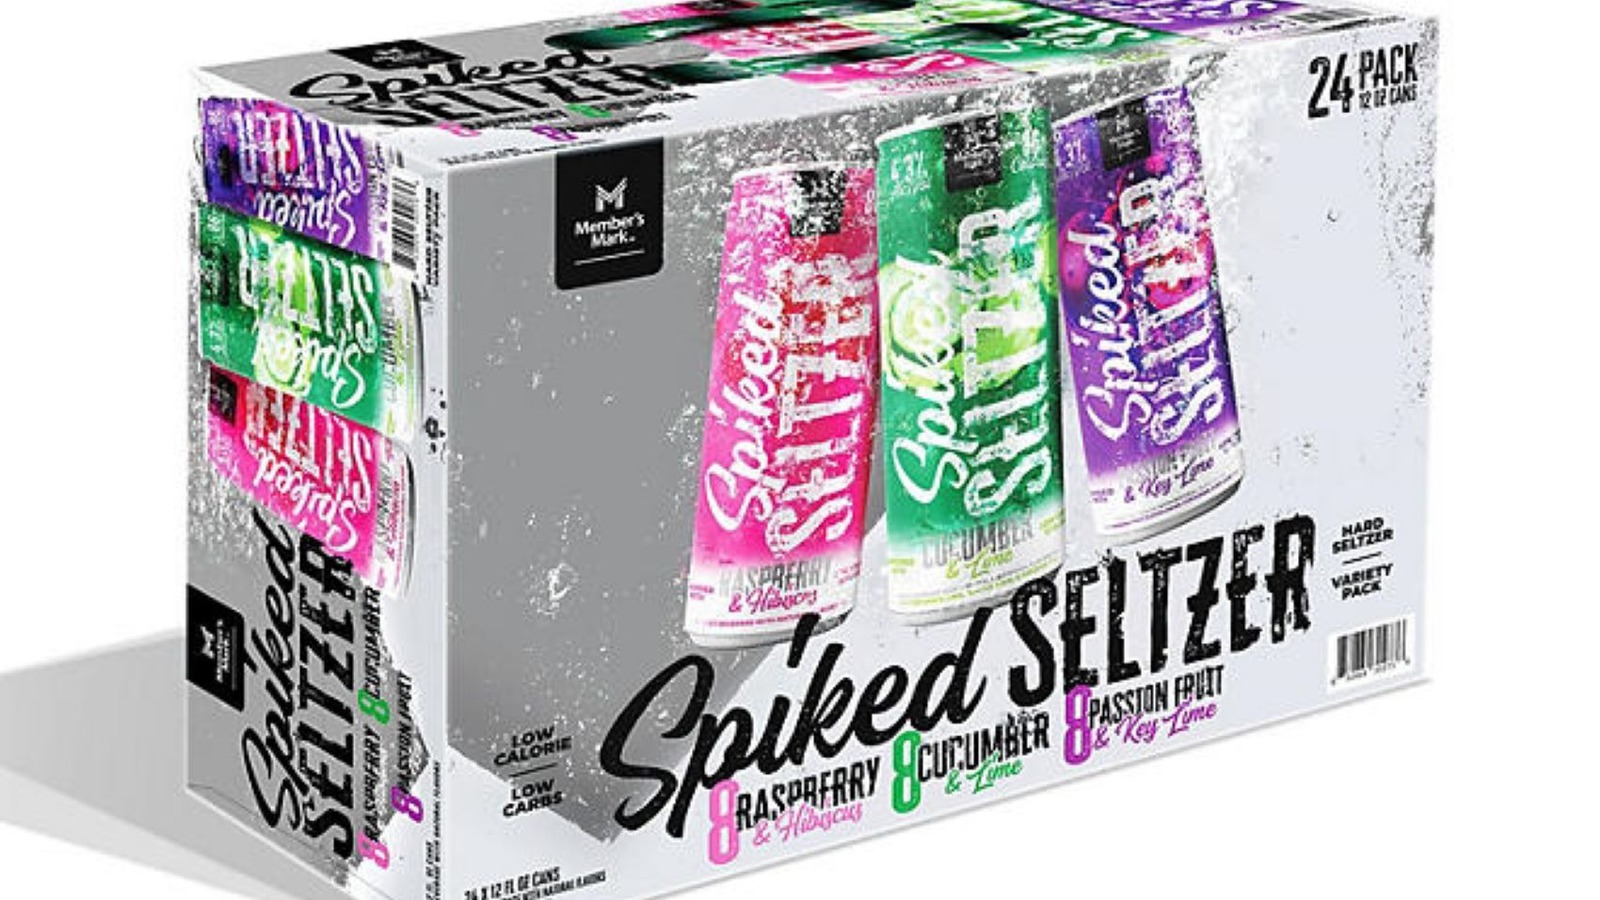 Sam’s Club Is Rolling Out Its Own Spiked Seltzer In Time For Memorial Day – The Daily Meal